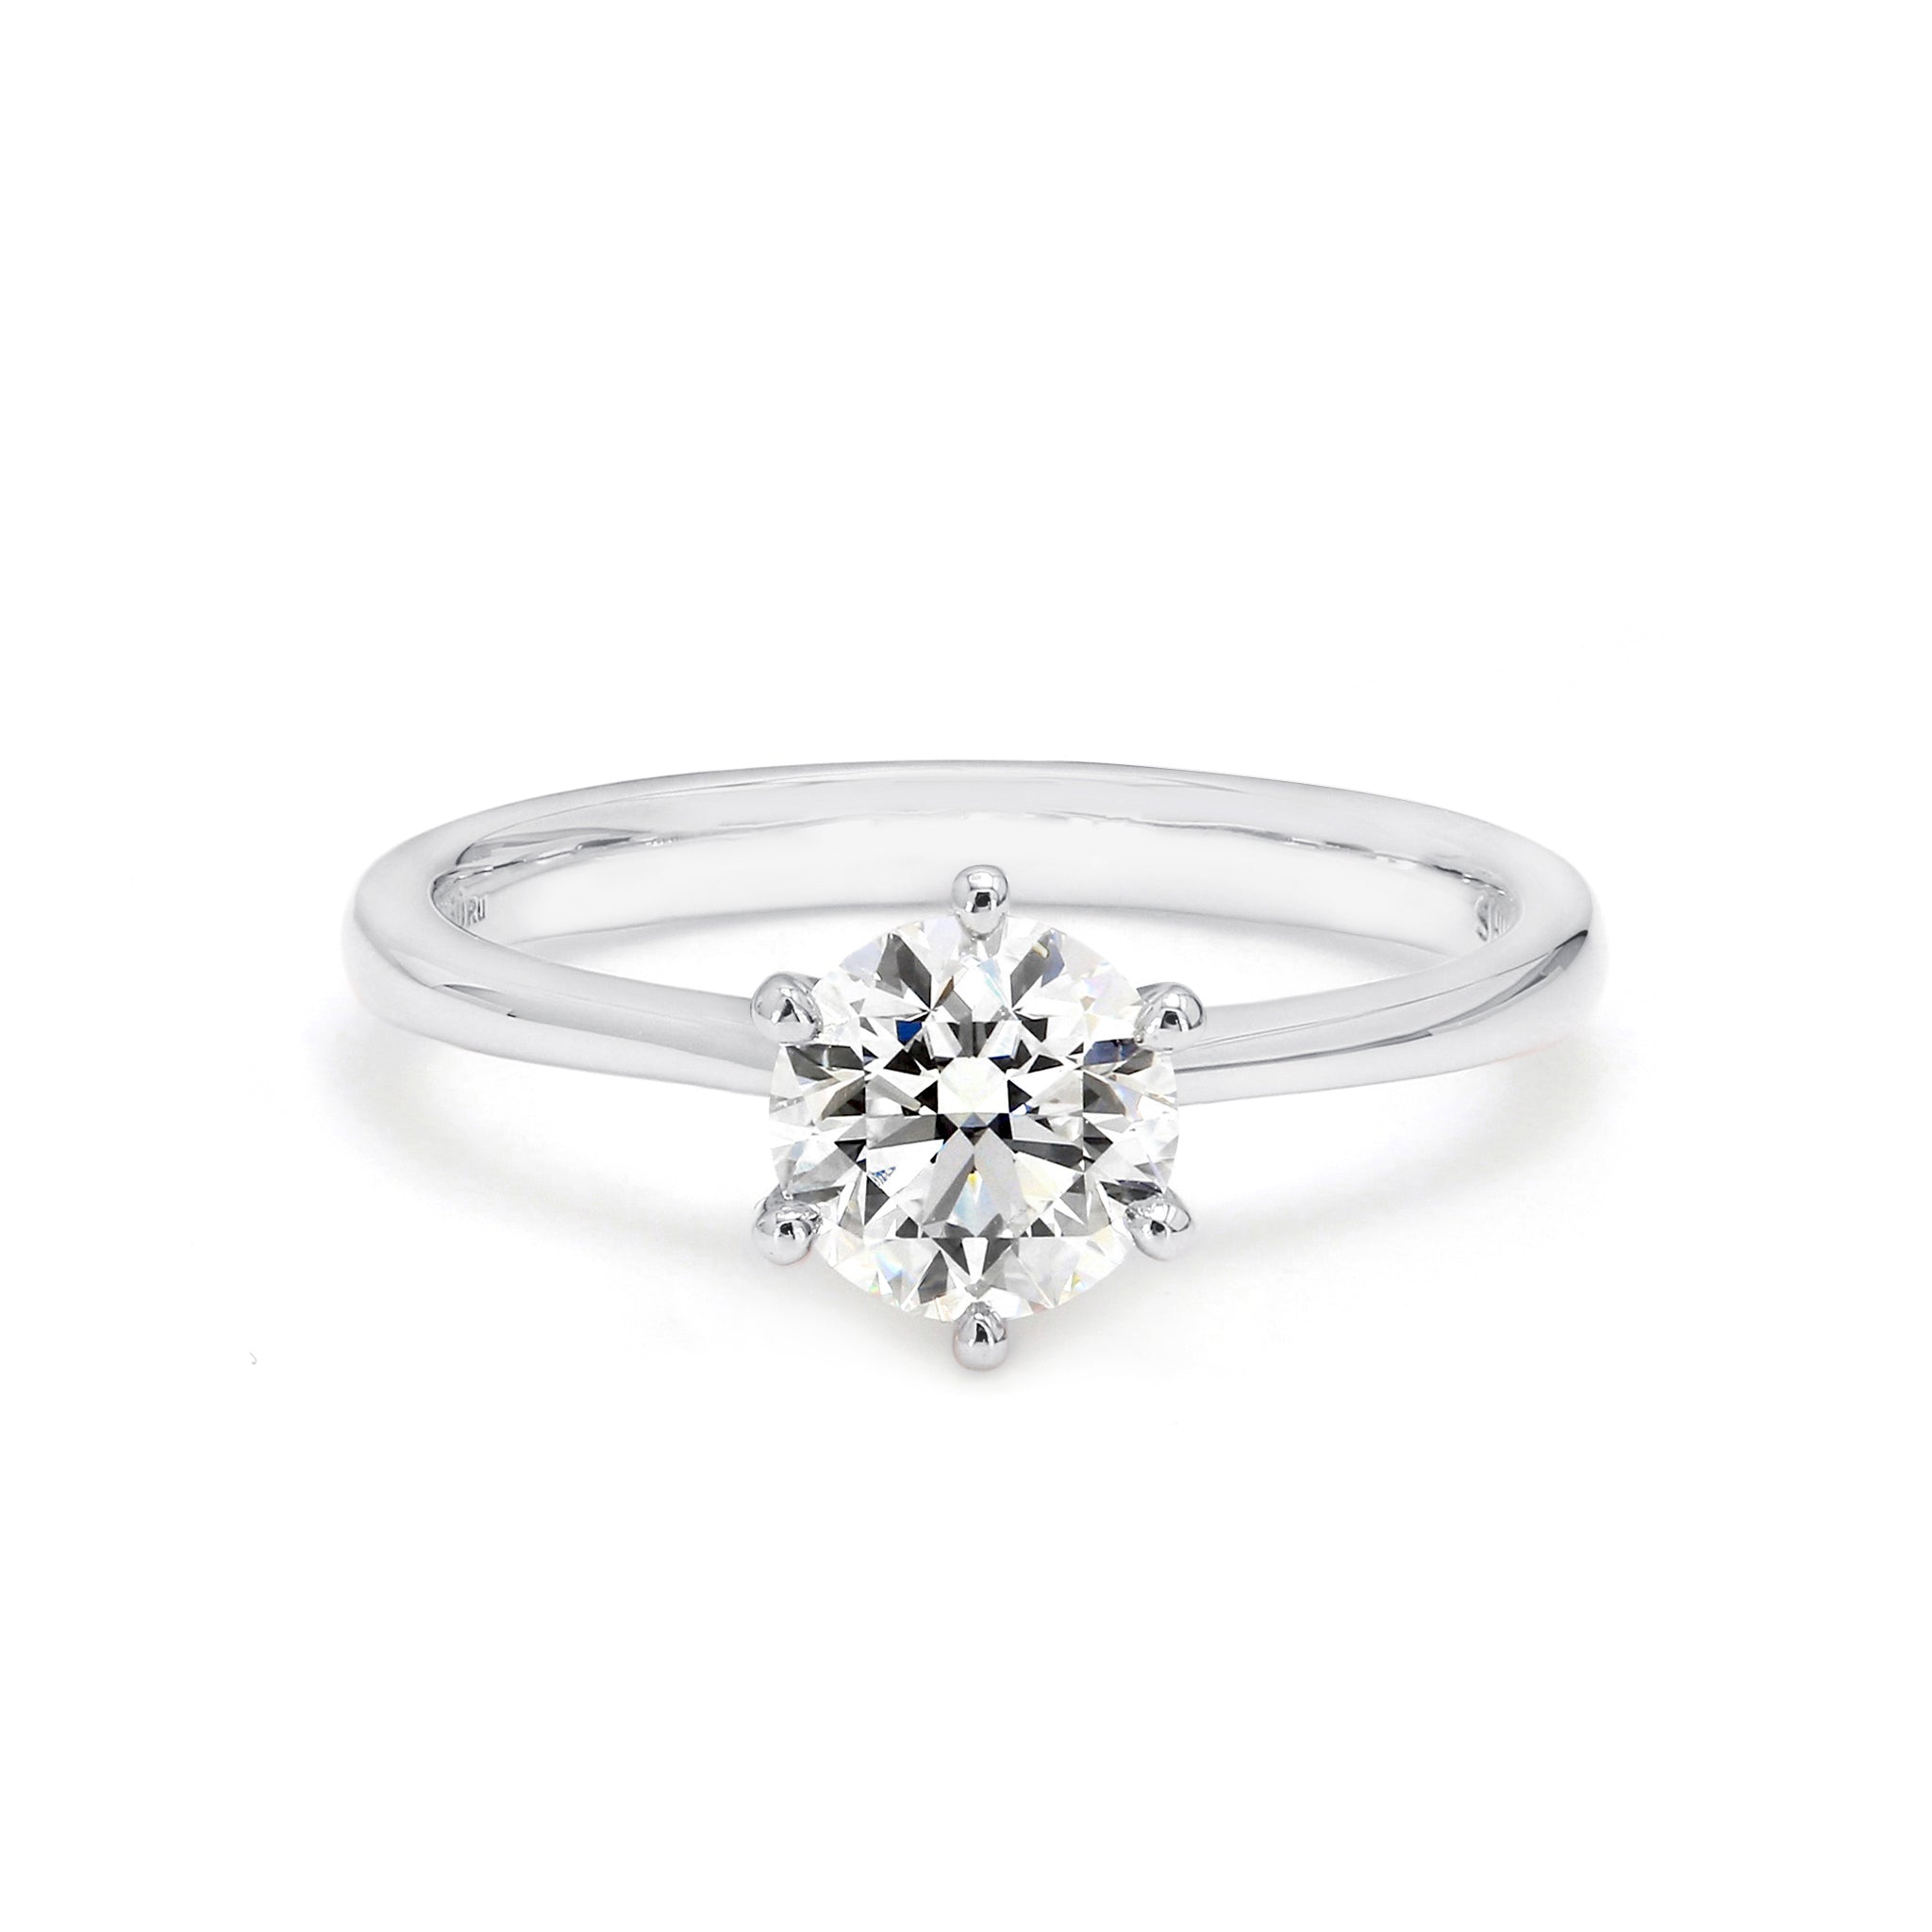 Shimansky - 6 Claw Classic Solitaire Diamond Ring 1.00ct crafted in 18K White Gold